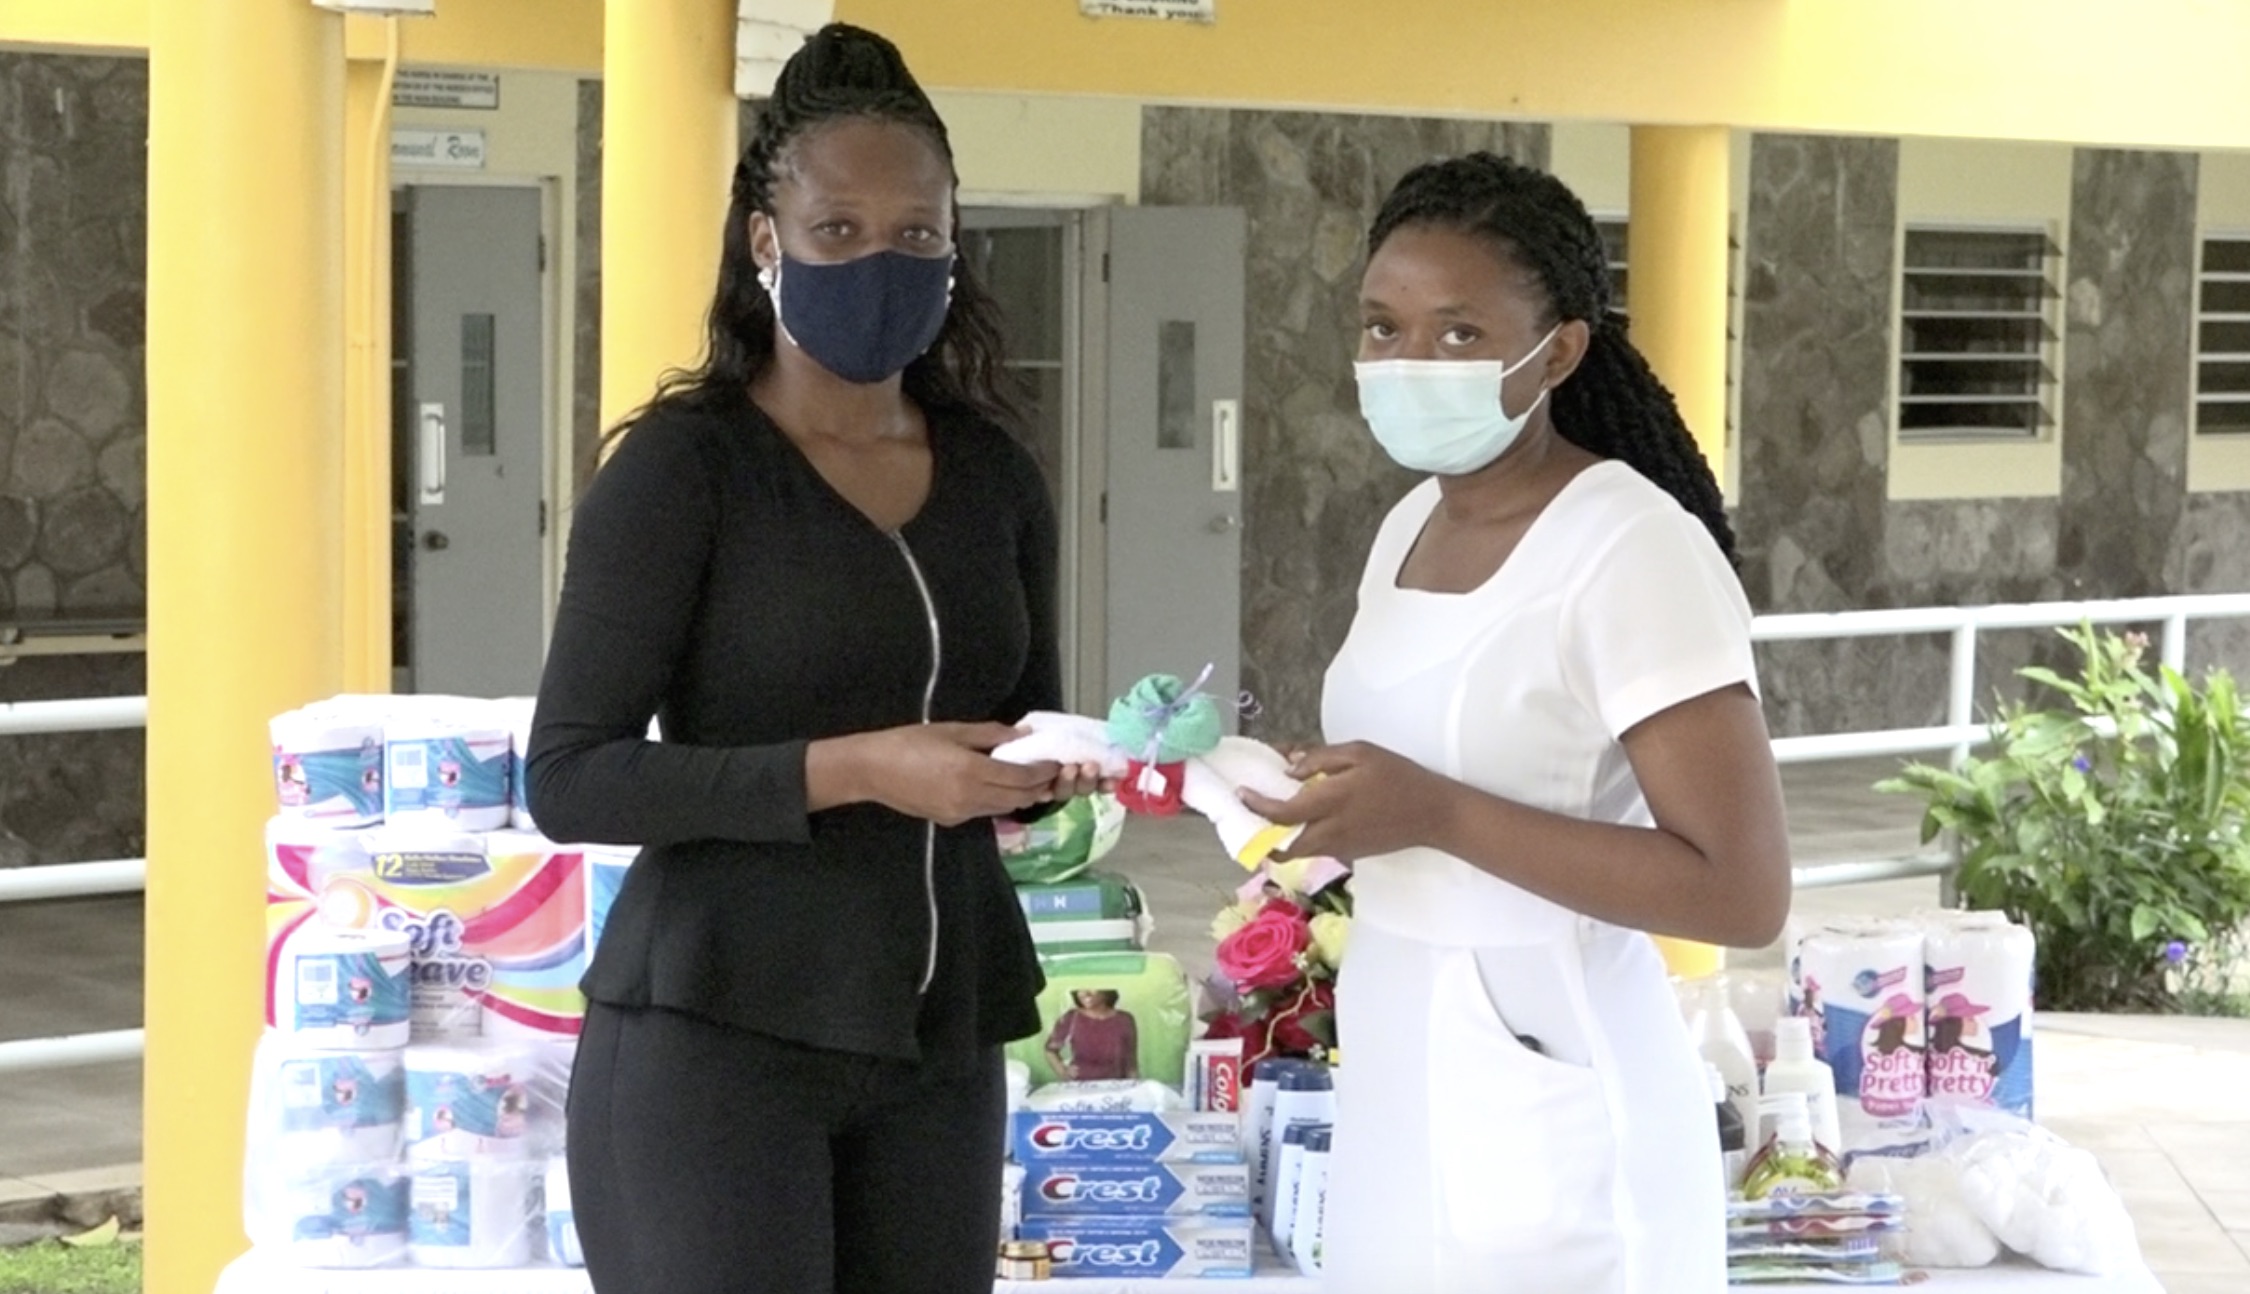 (l-r) Ms. Latoya Jones, President of the Concerned Citizens Movement Women’s Arm presents a donation of essential personal care supplies on behalf of the group to Kella Didier, Registered Nurse for the residents of the Flamboyant Nursing Home on November 10, 2010